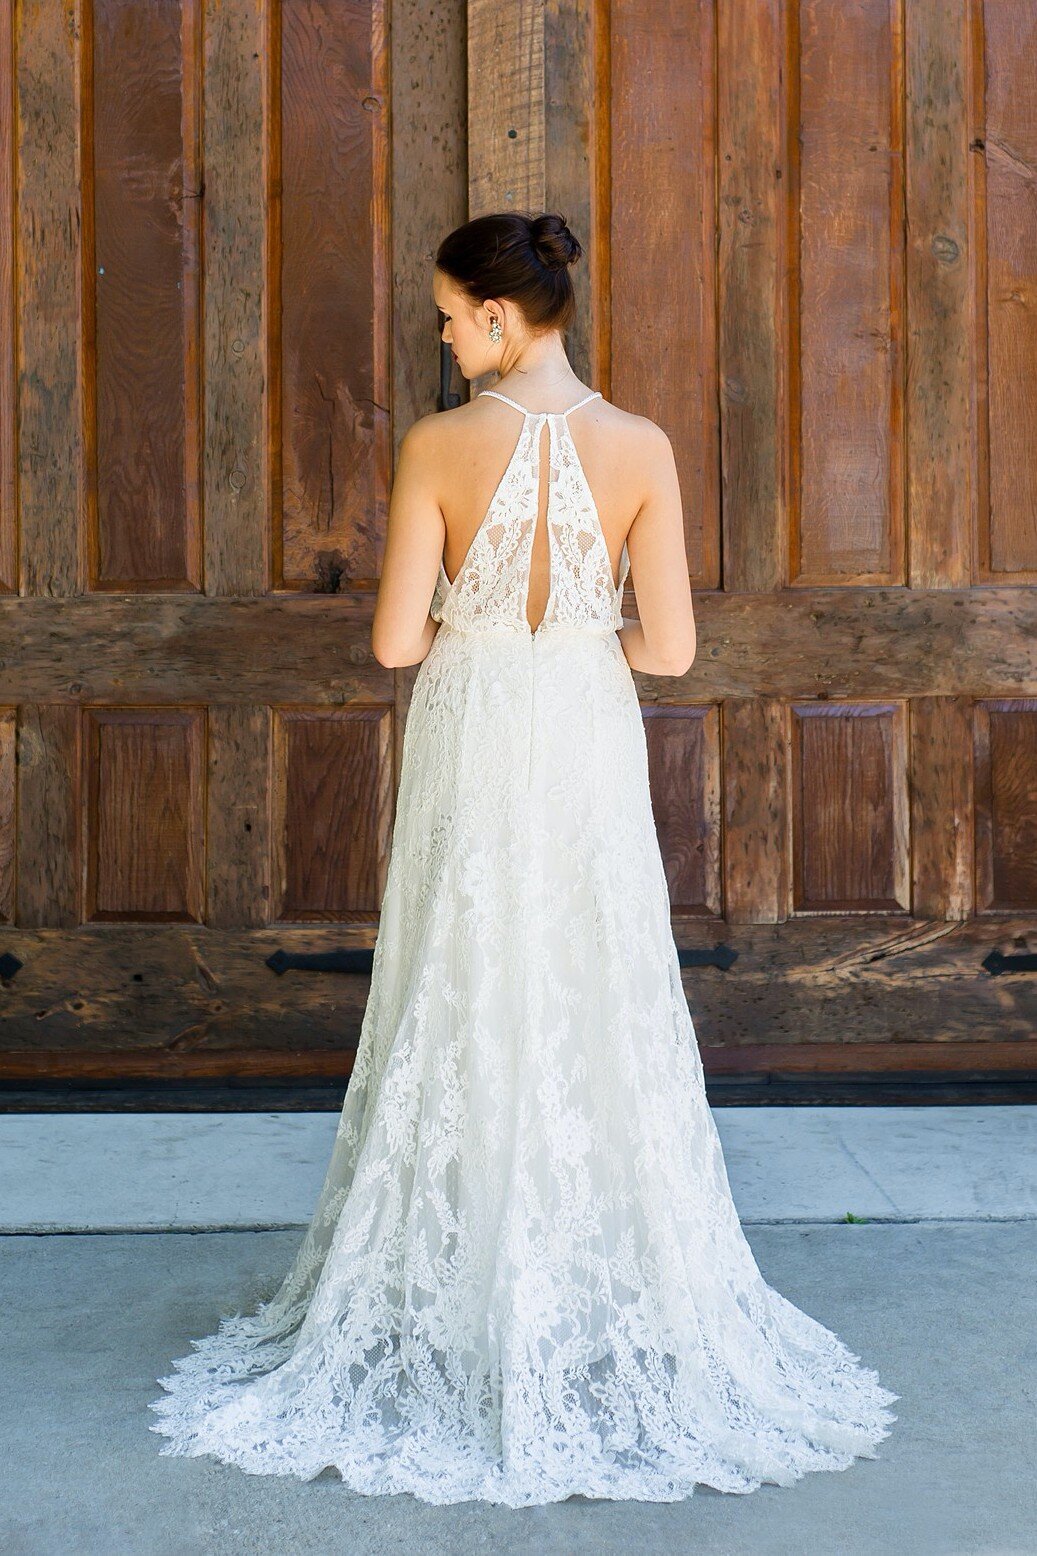 The Sabine wedding dress style features a sheer lace racerback bodice paired with a fitted crepe and lace skirt.